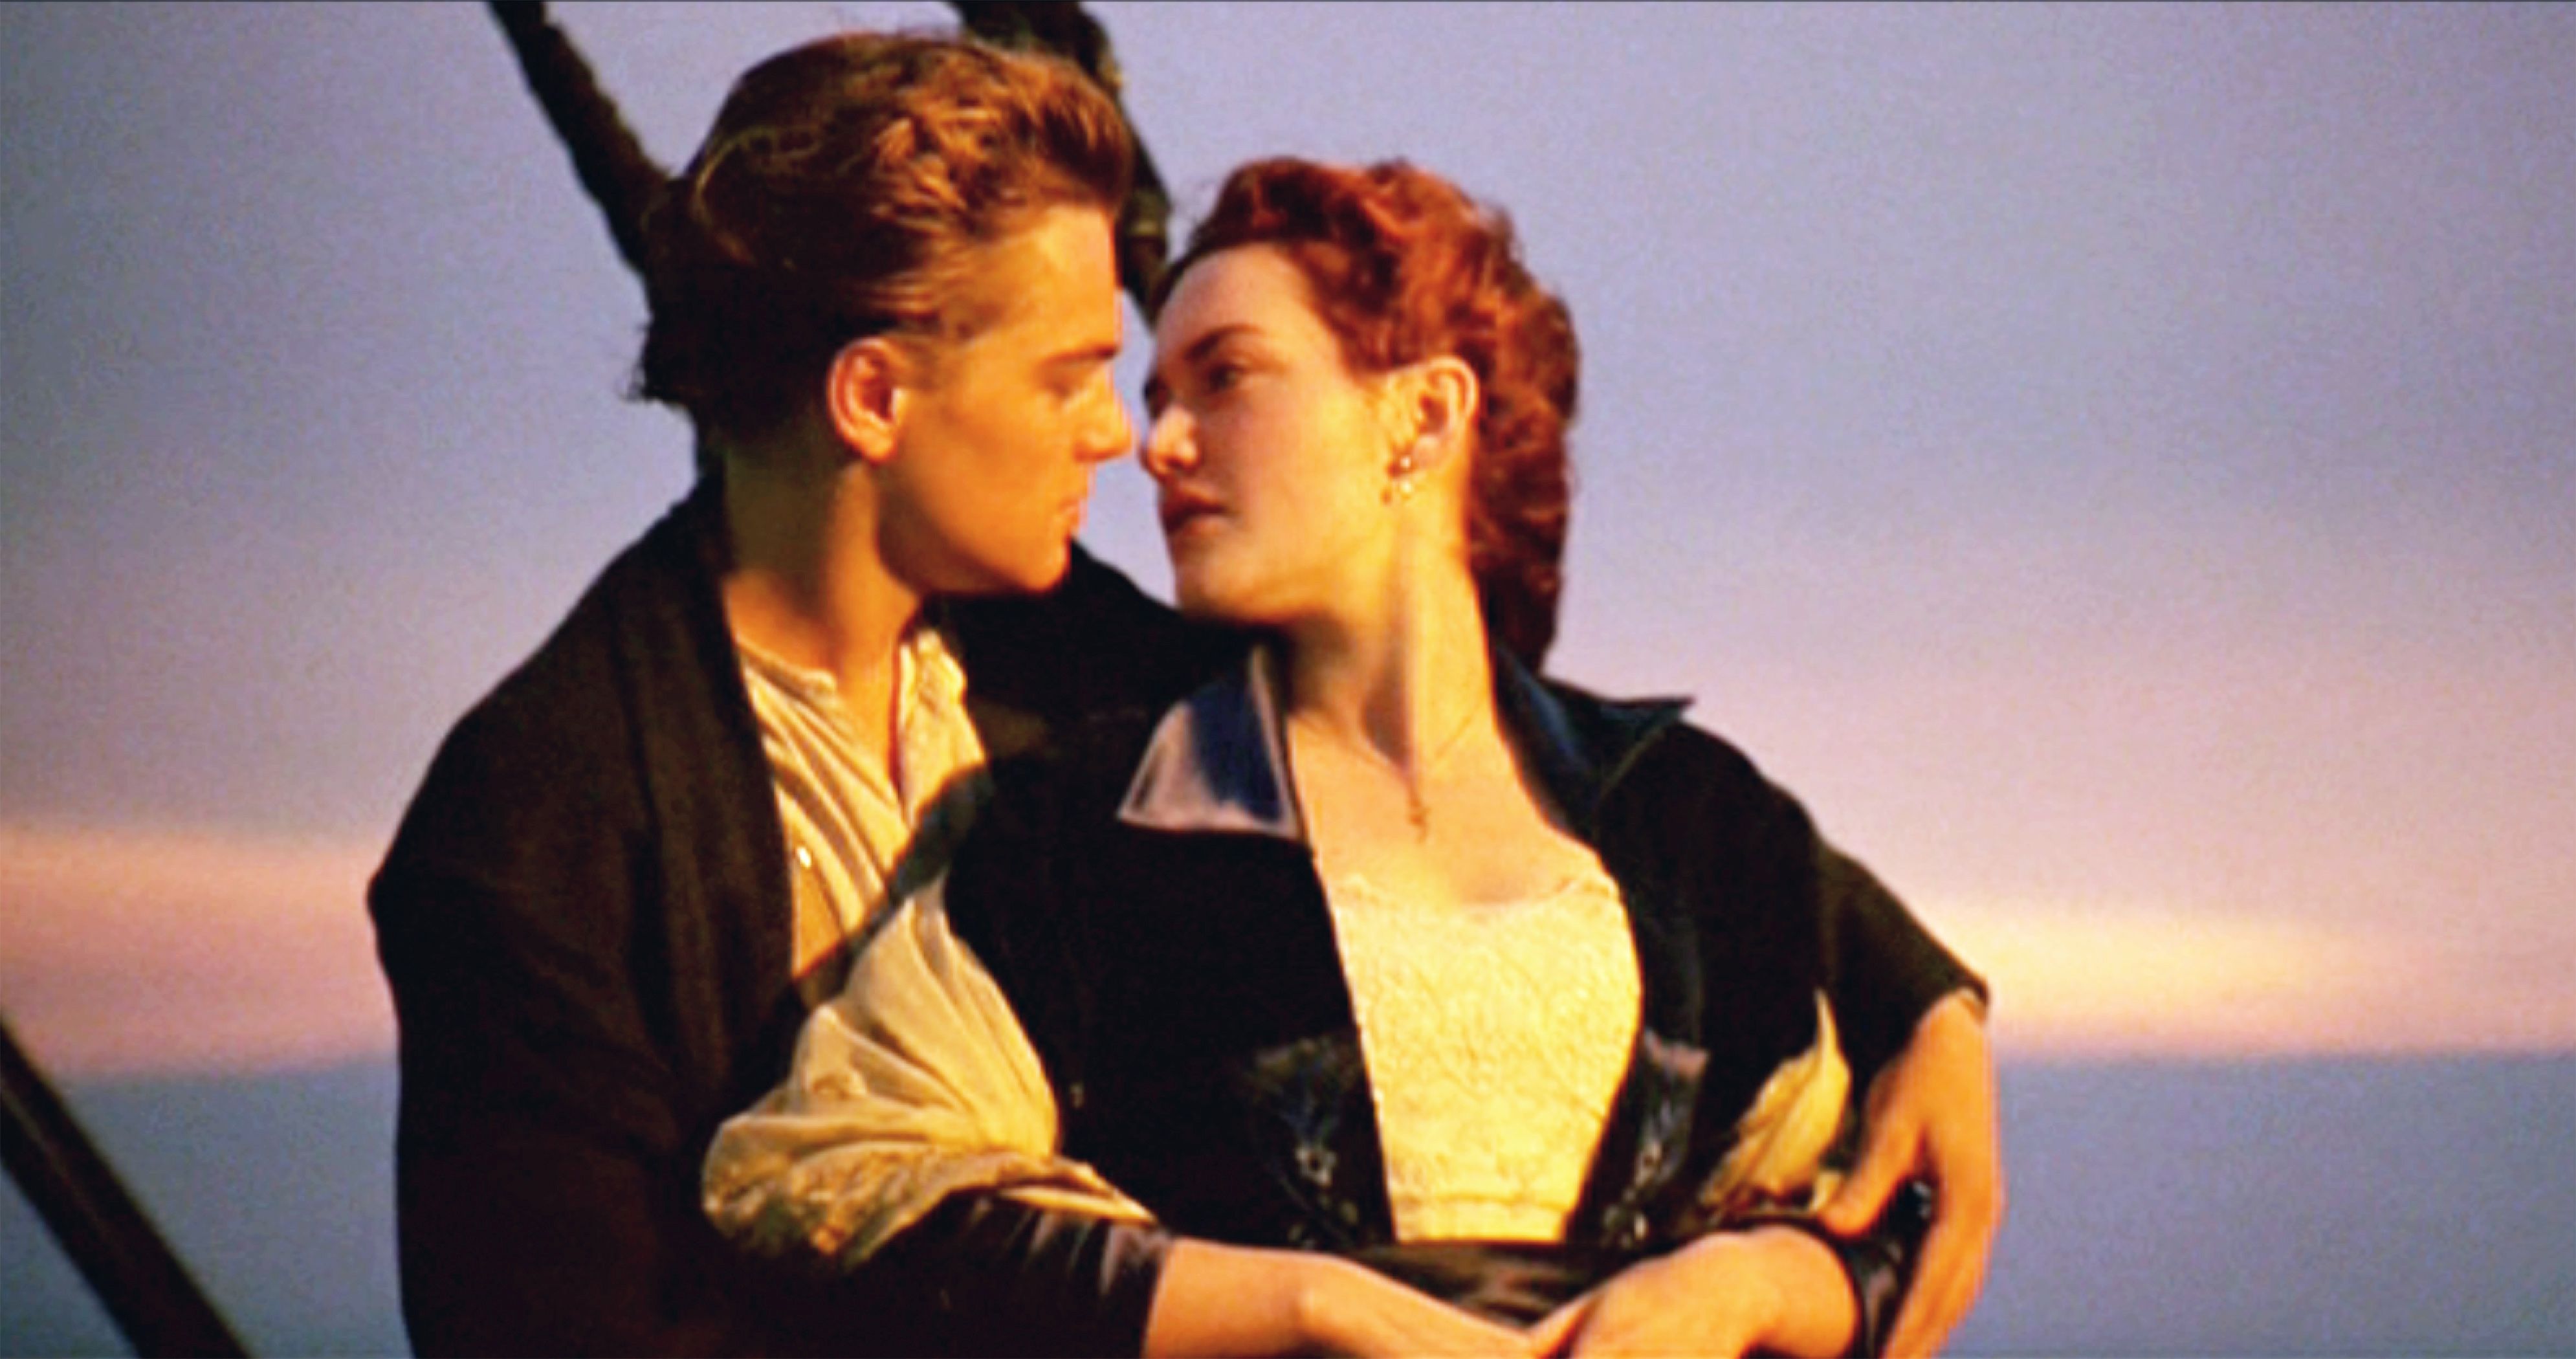 Spend time watching films together, such as Titanic.